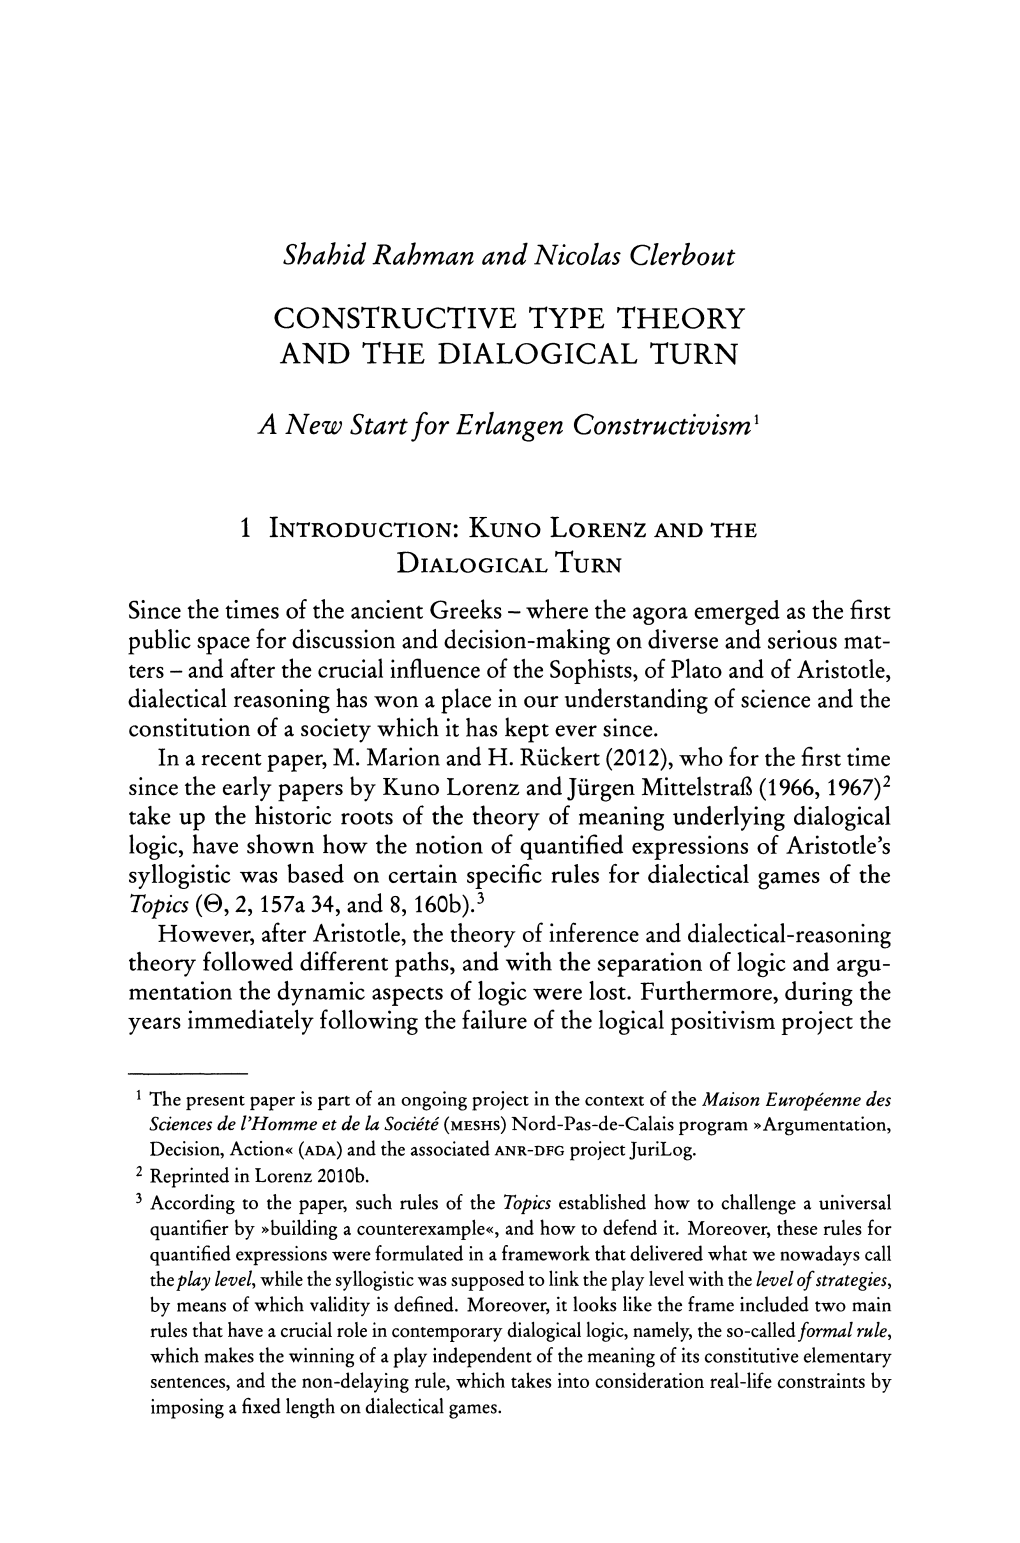 Constructive Type Theory and the Dialogical Turn